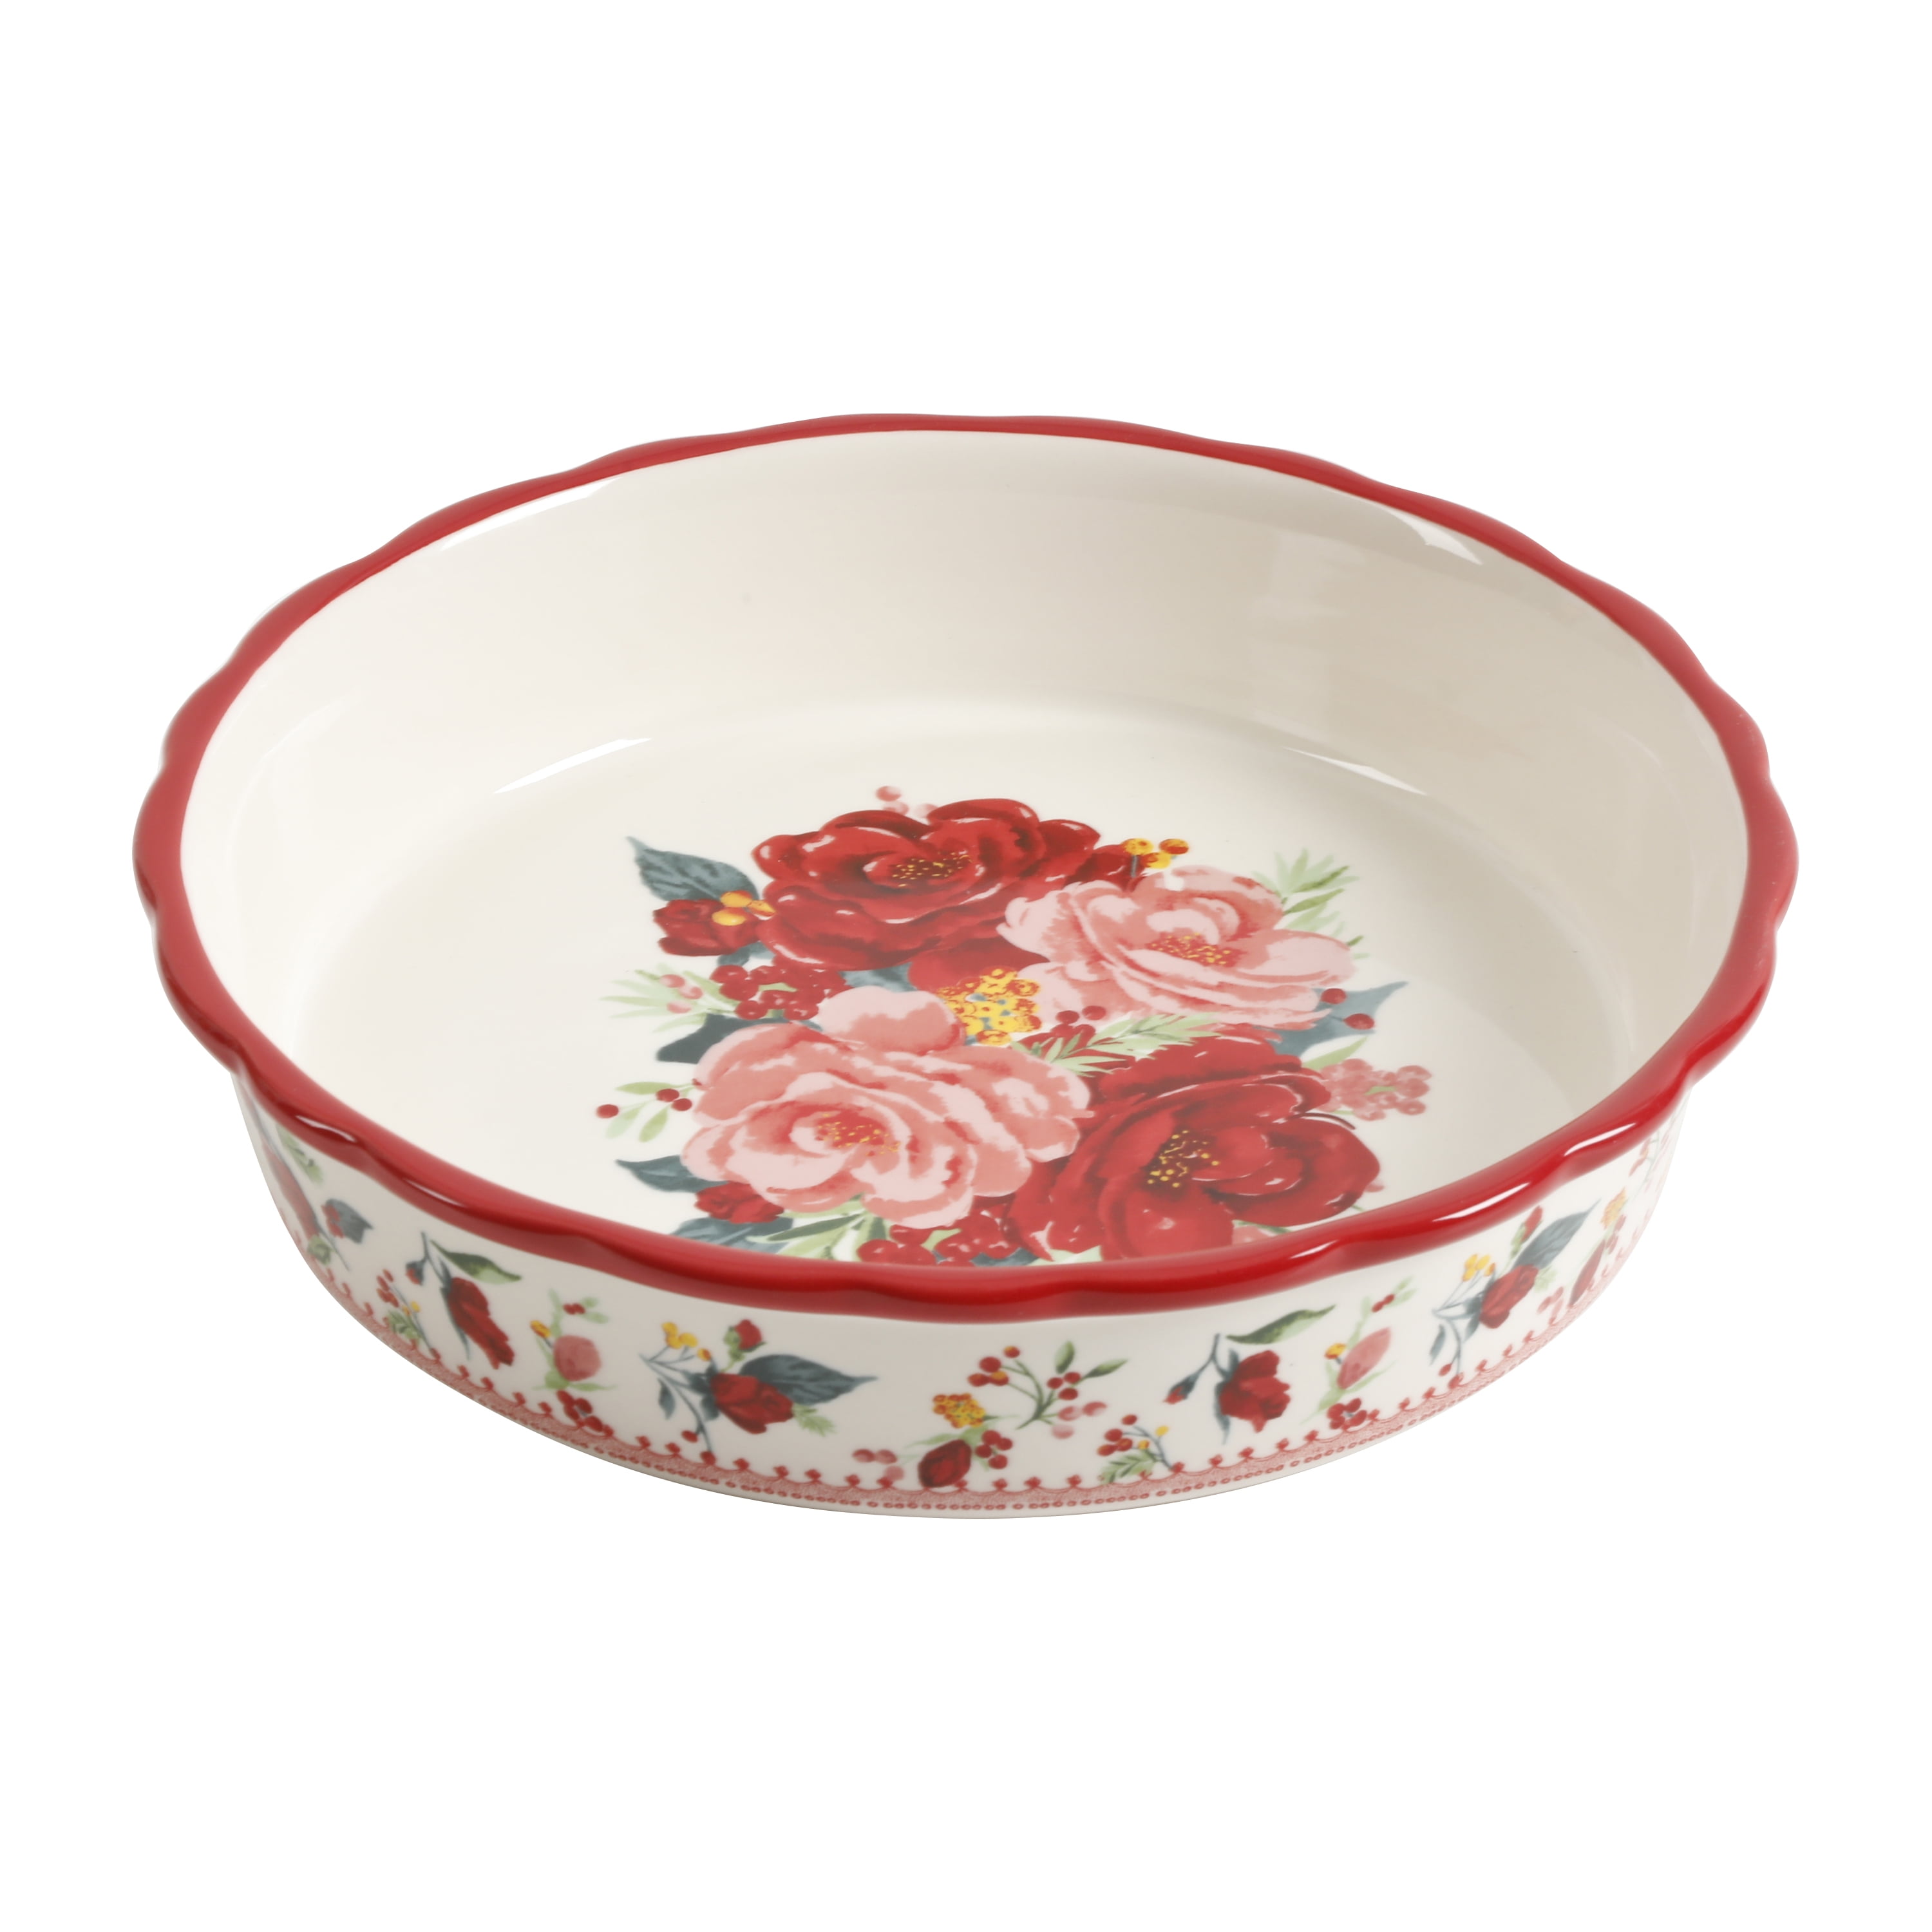 Details about   Rosanna Wishing You a Merry Christmas 8.75" Rimmed Soup Salad Bowl Italy 